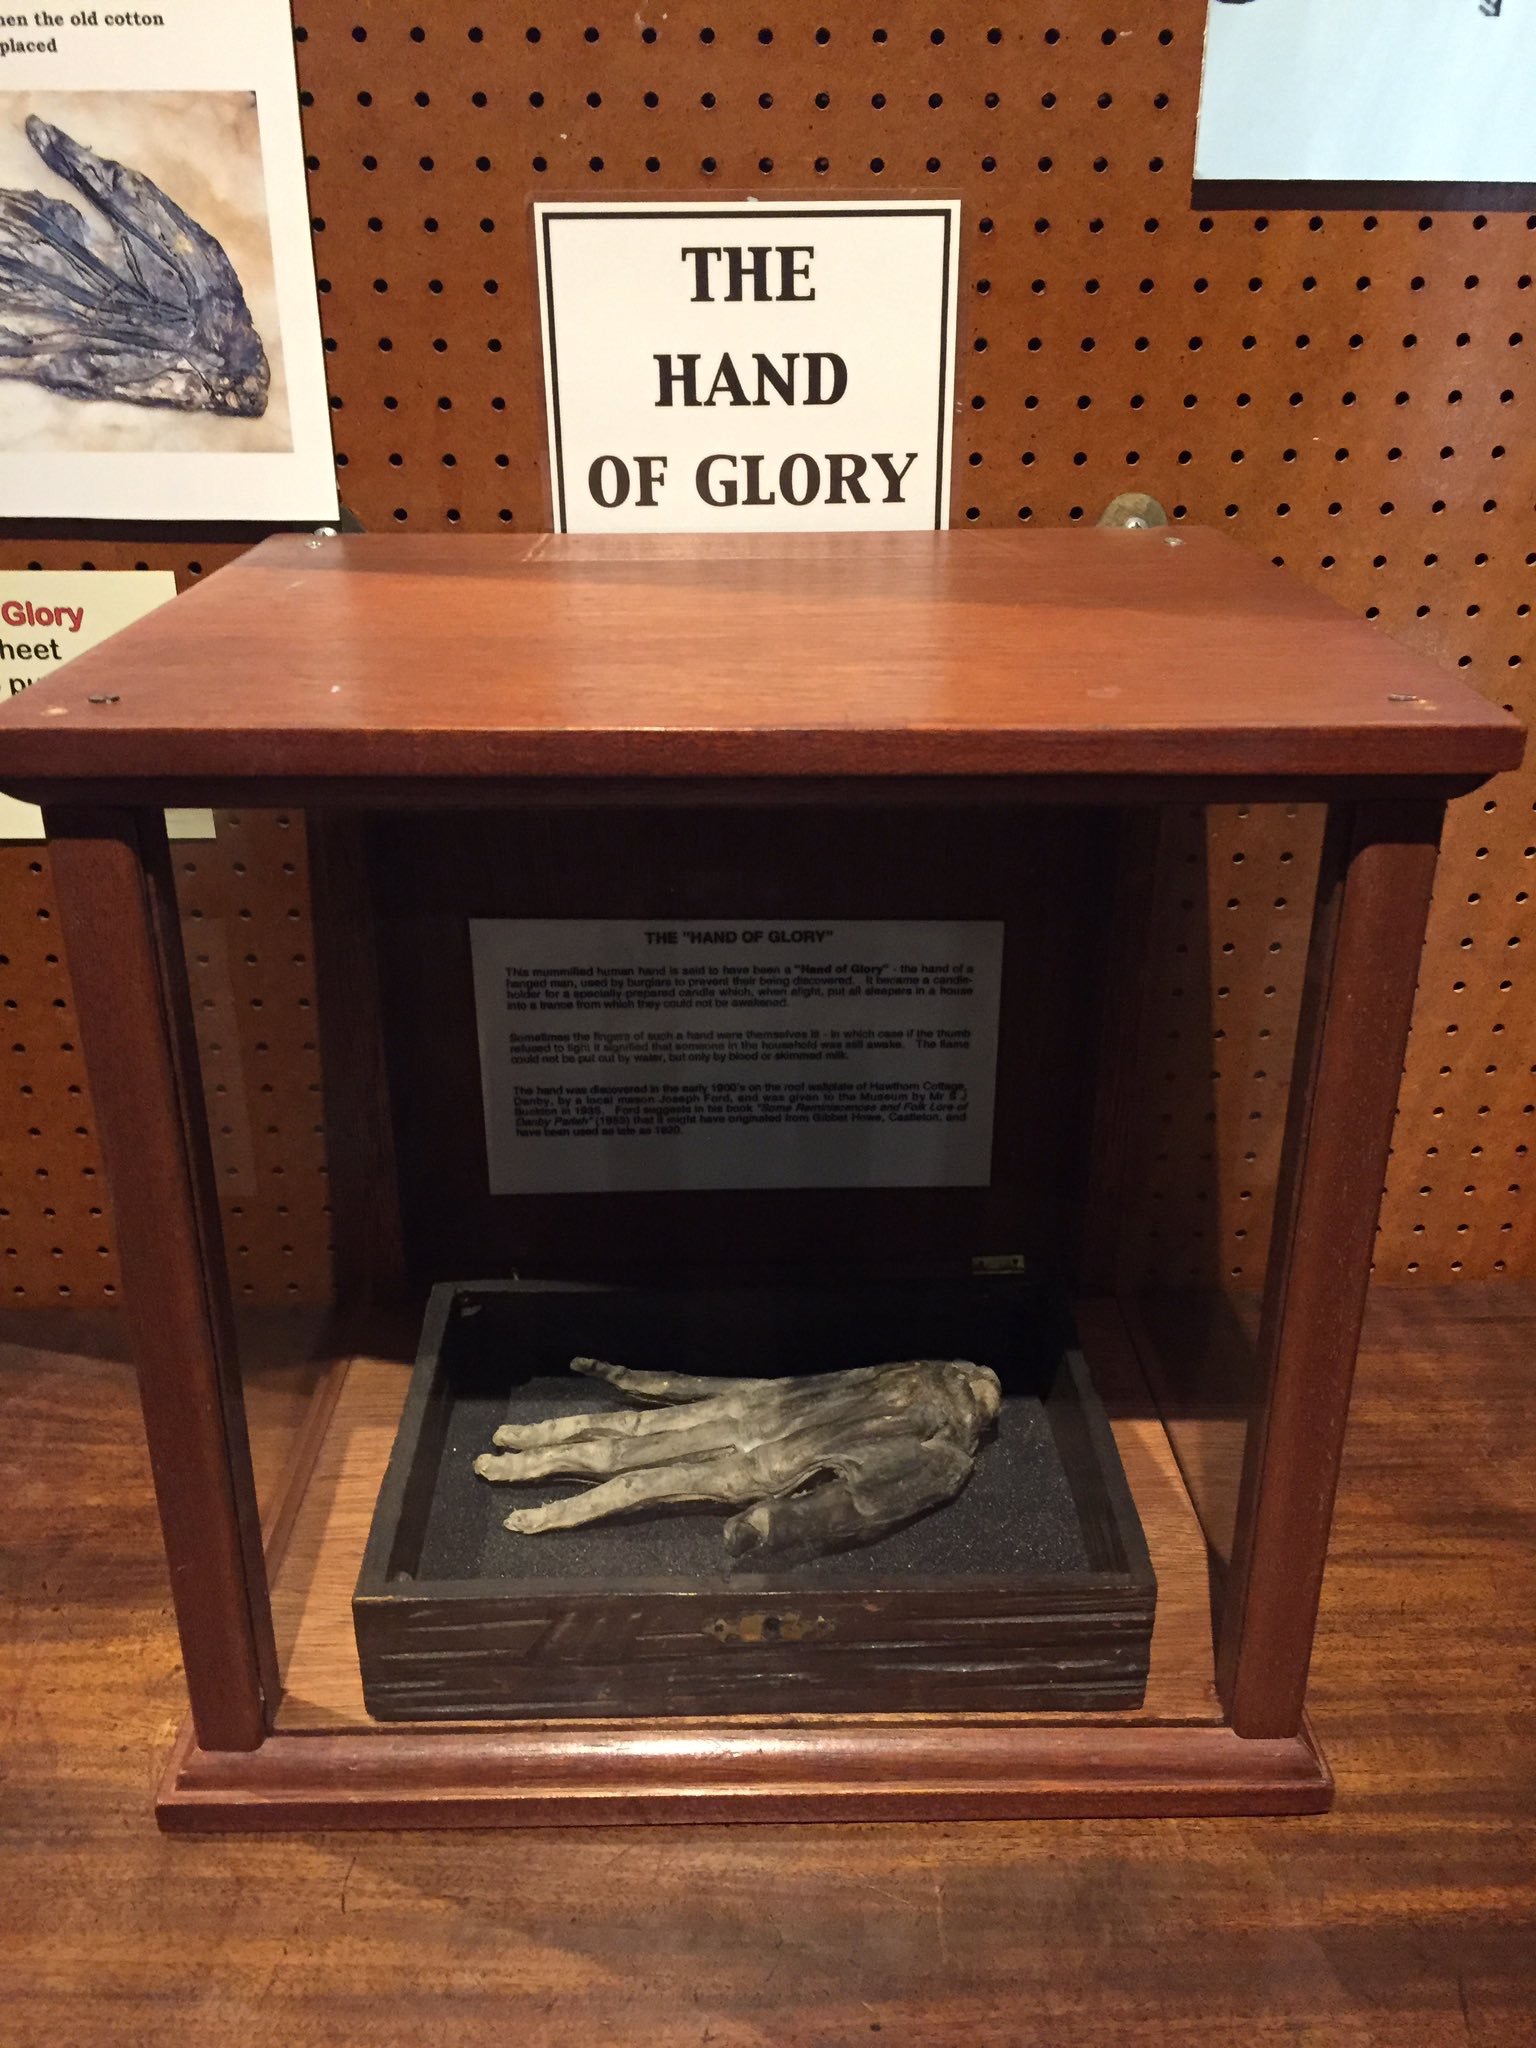 Whitby Museum's Hand of Glory